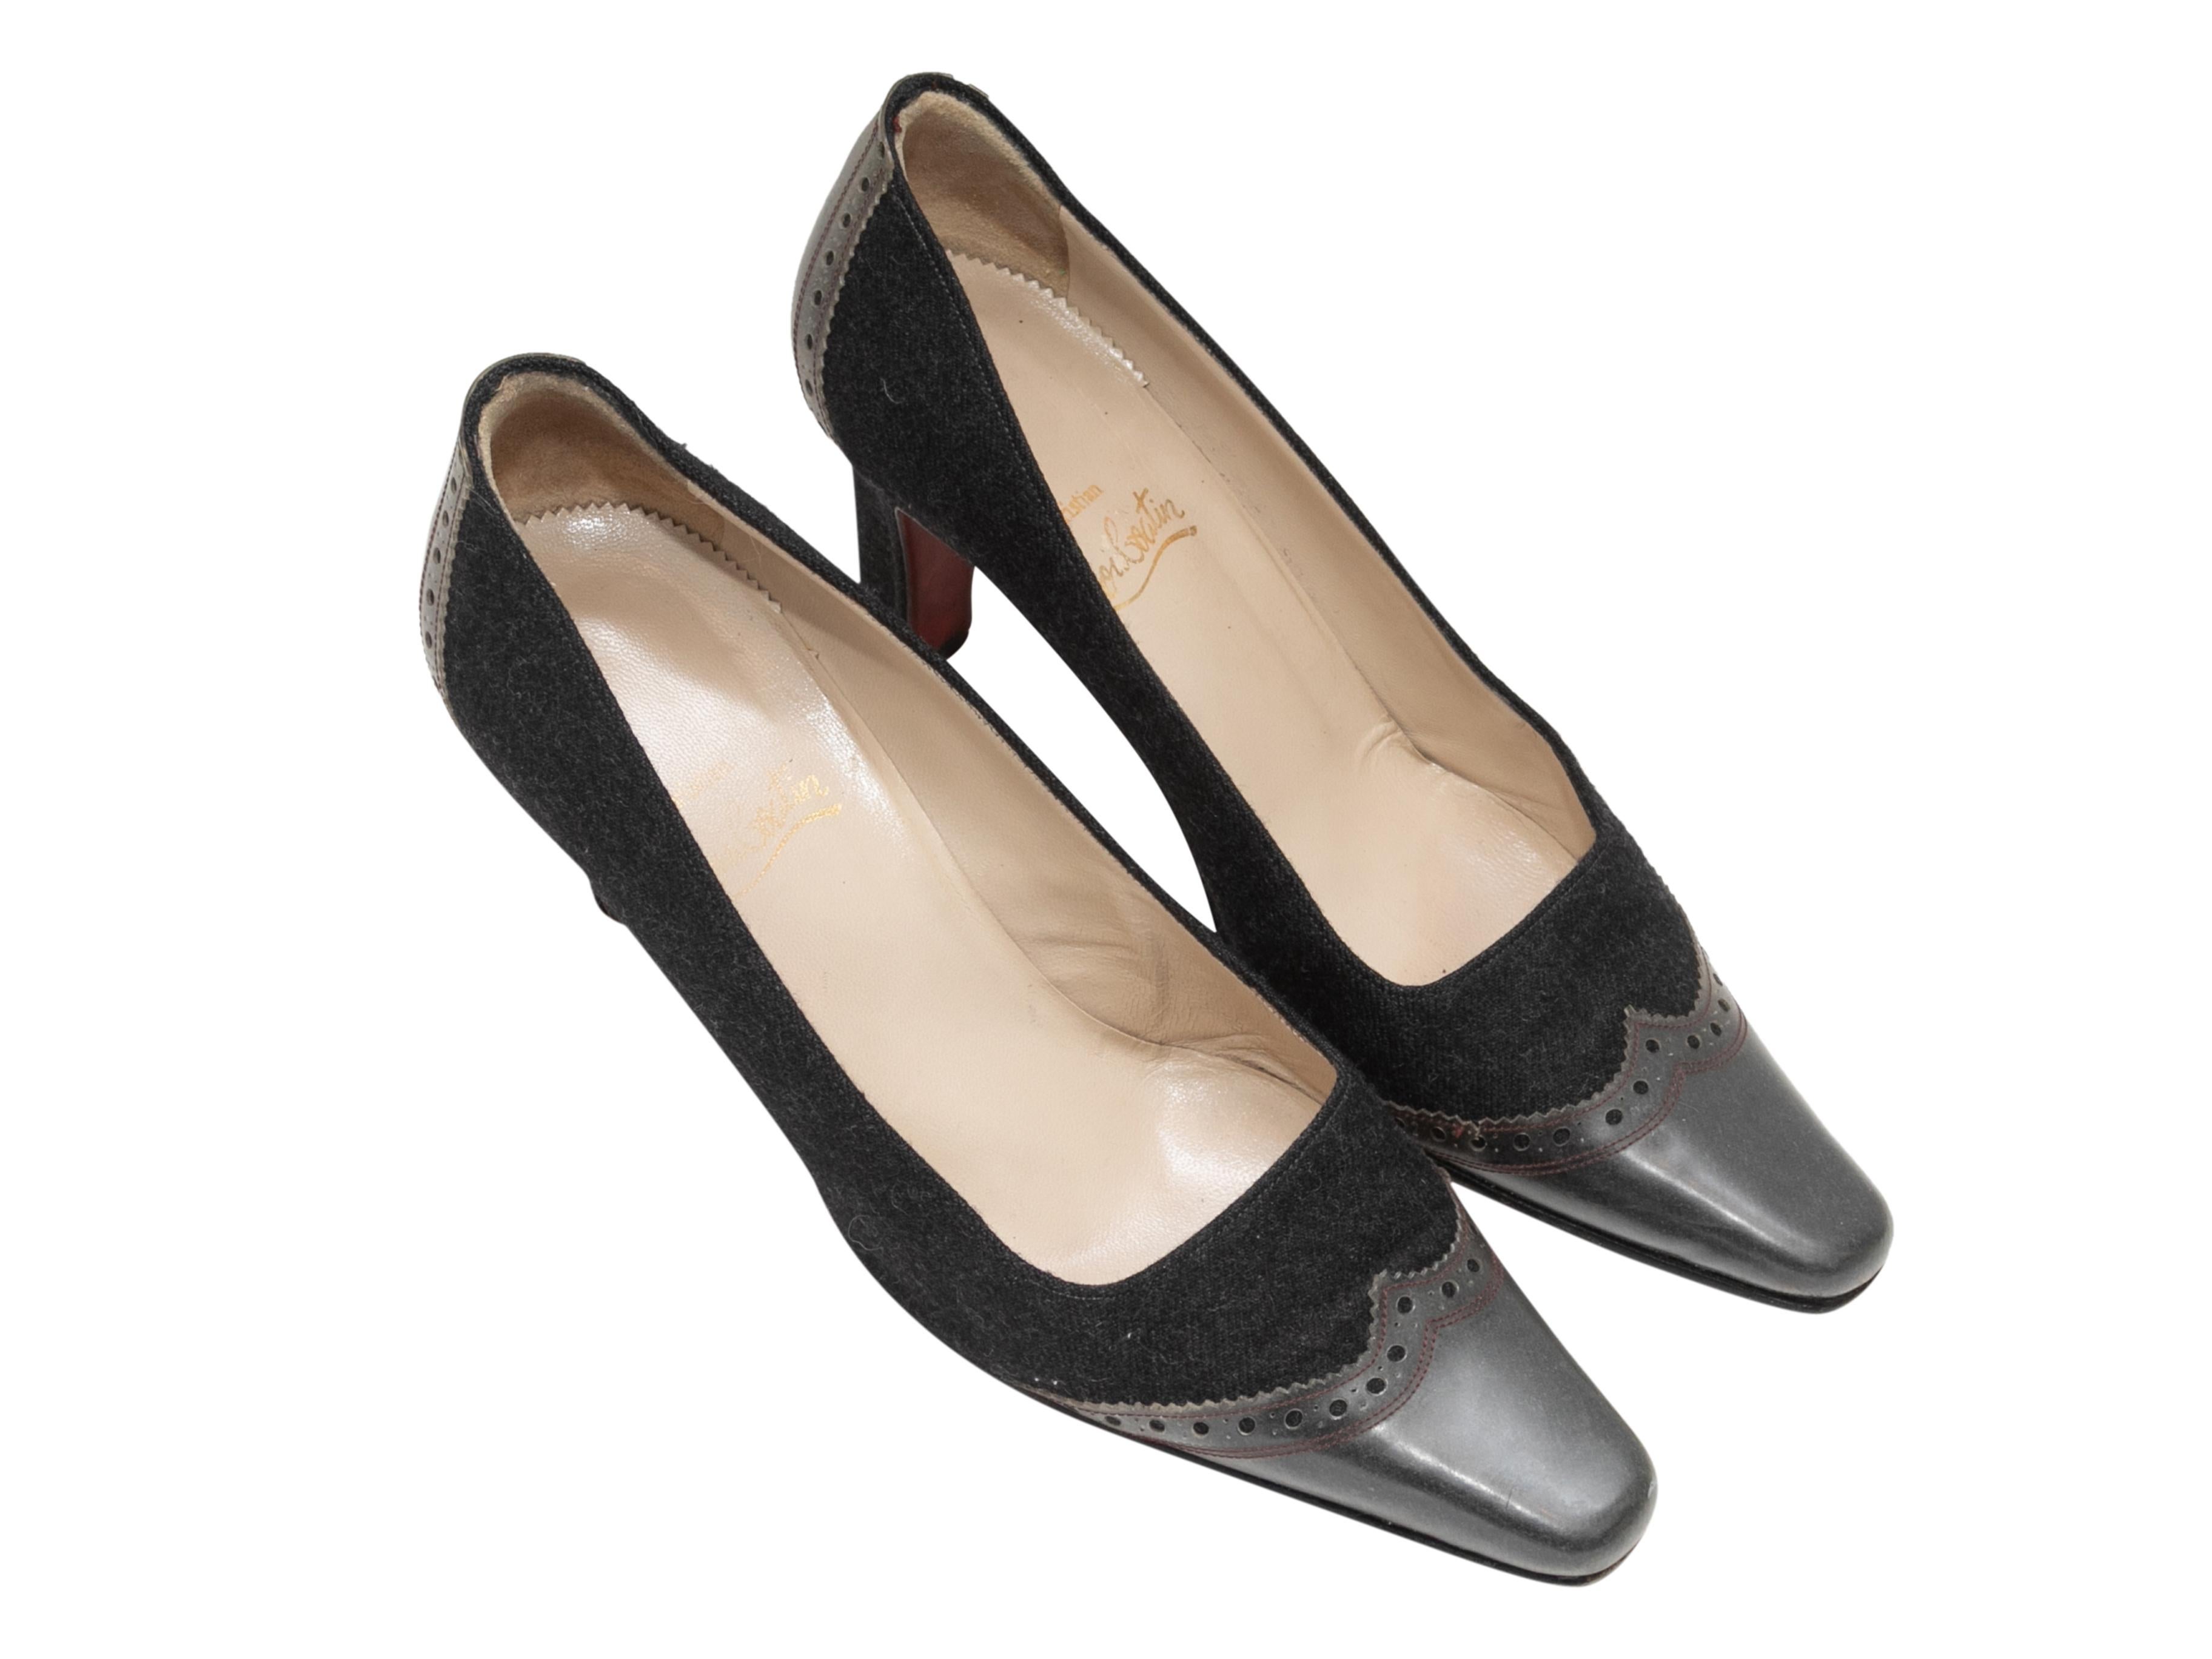 Black wool and leather pointed-toe brogue pumps by Christian Louboutin. 2.5